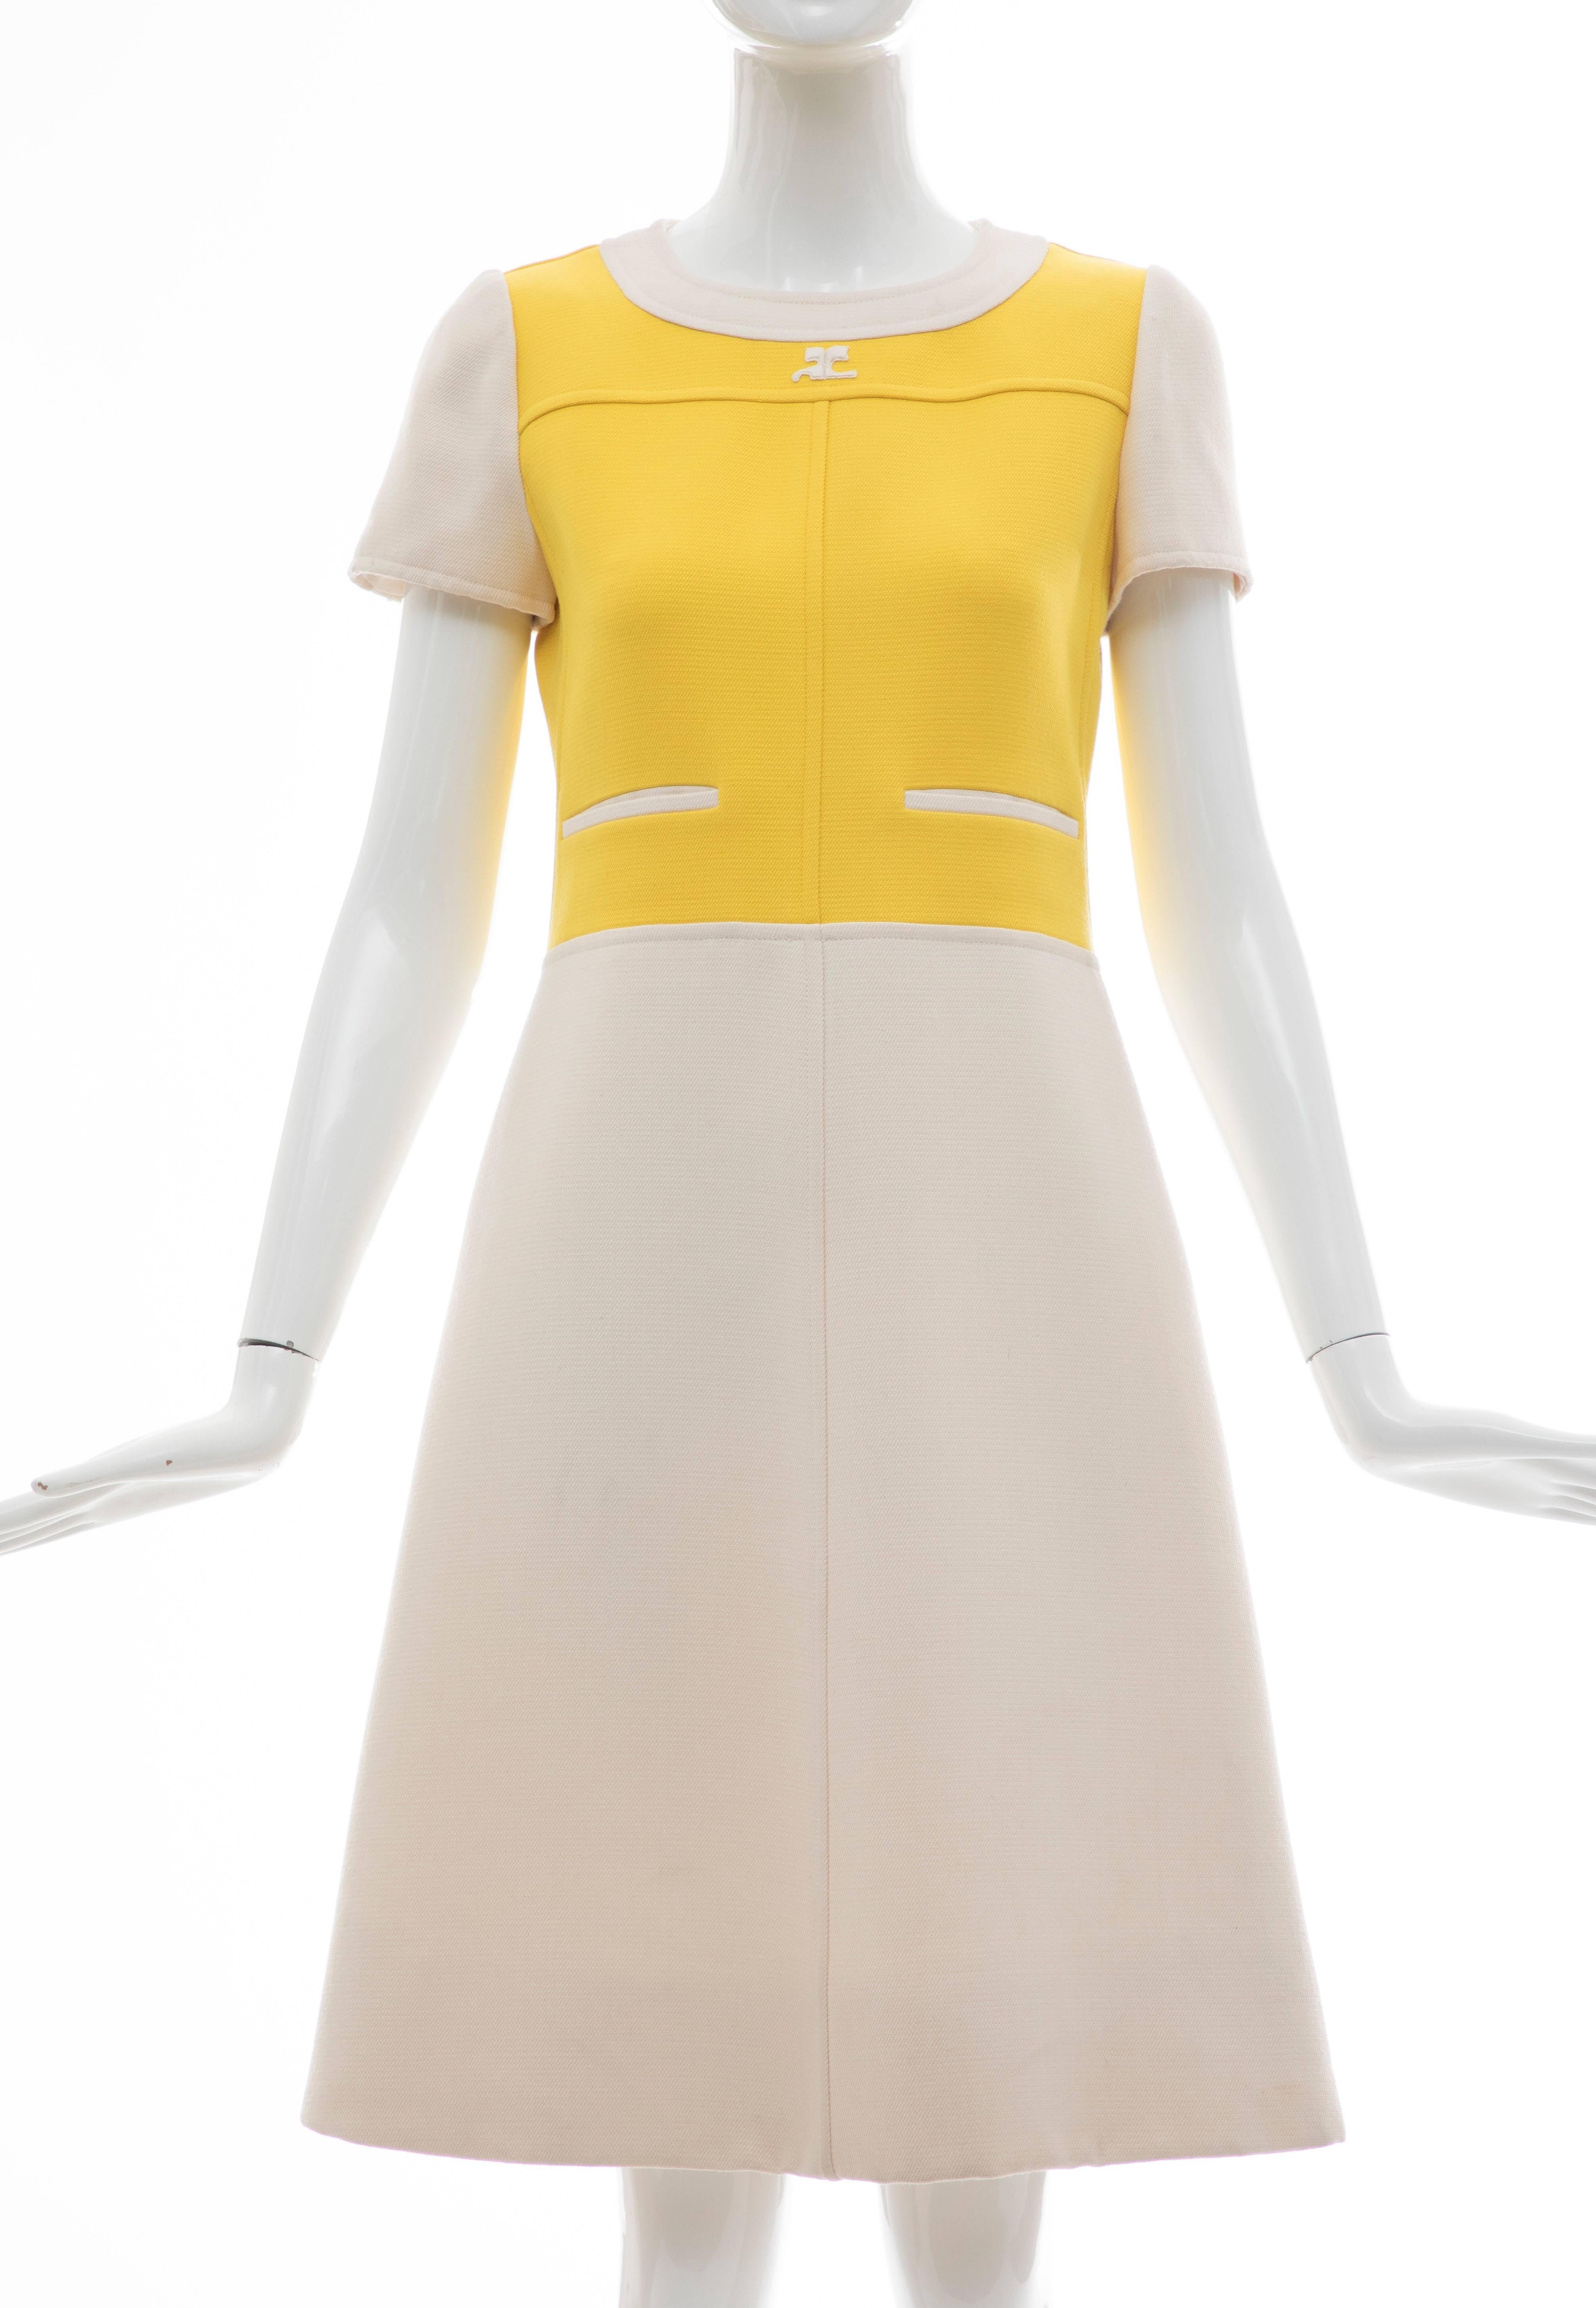 Andre Courreges, circa: 1960's  yellow cream wool cap sleeve A-Line dress with back button & snap closure and fully lined.

Bust: 32, Waist: 30, Hip: 38, Shoulder: 13, Length: 38

Size A